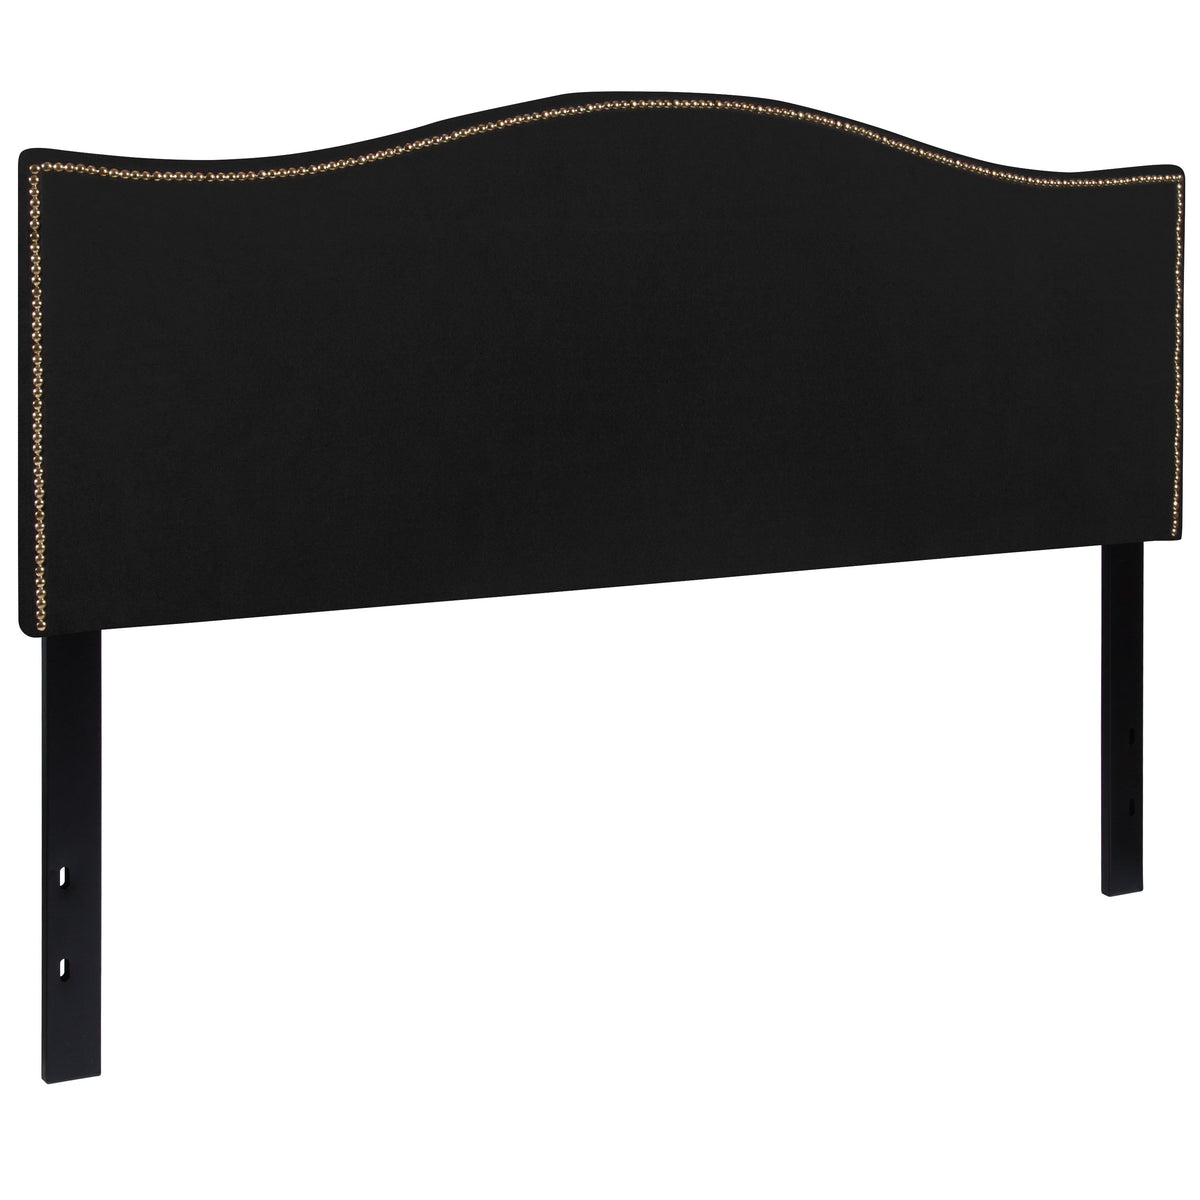 Black,Queen |#| Upholstered Queen Size Arched Headboard with Accent Nail Trim in Black Fabric